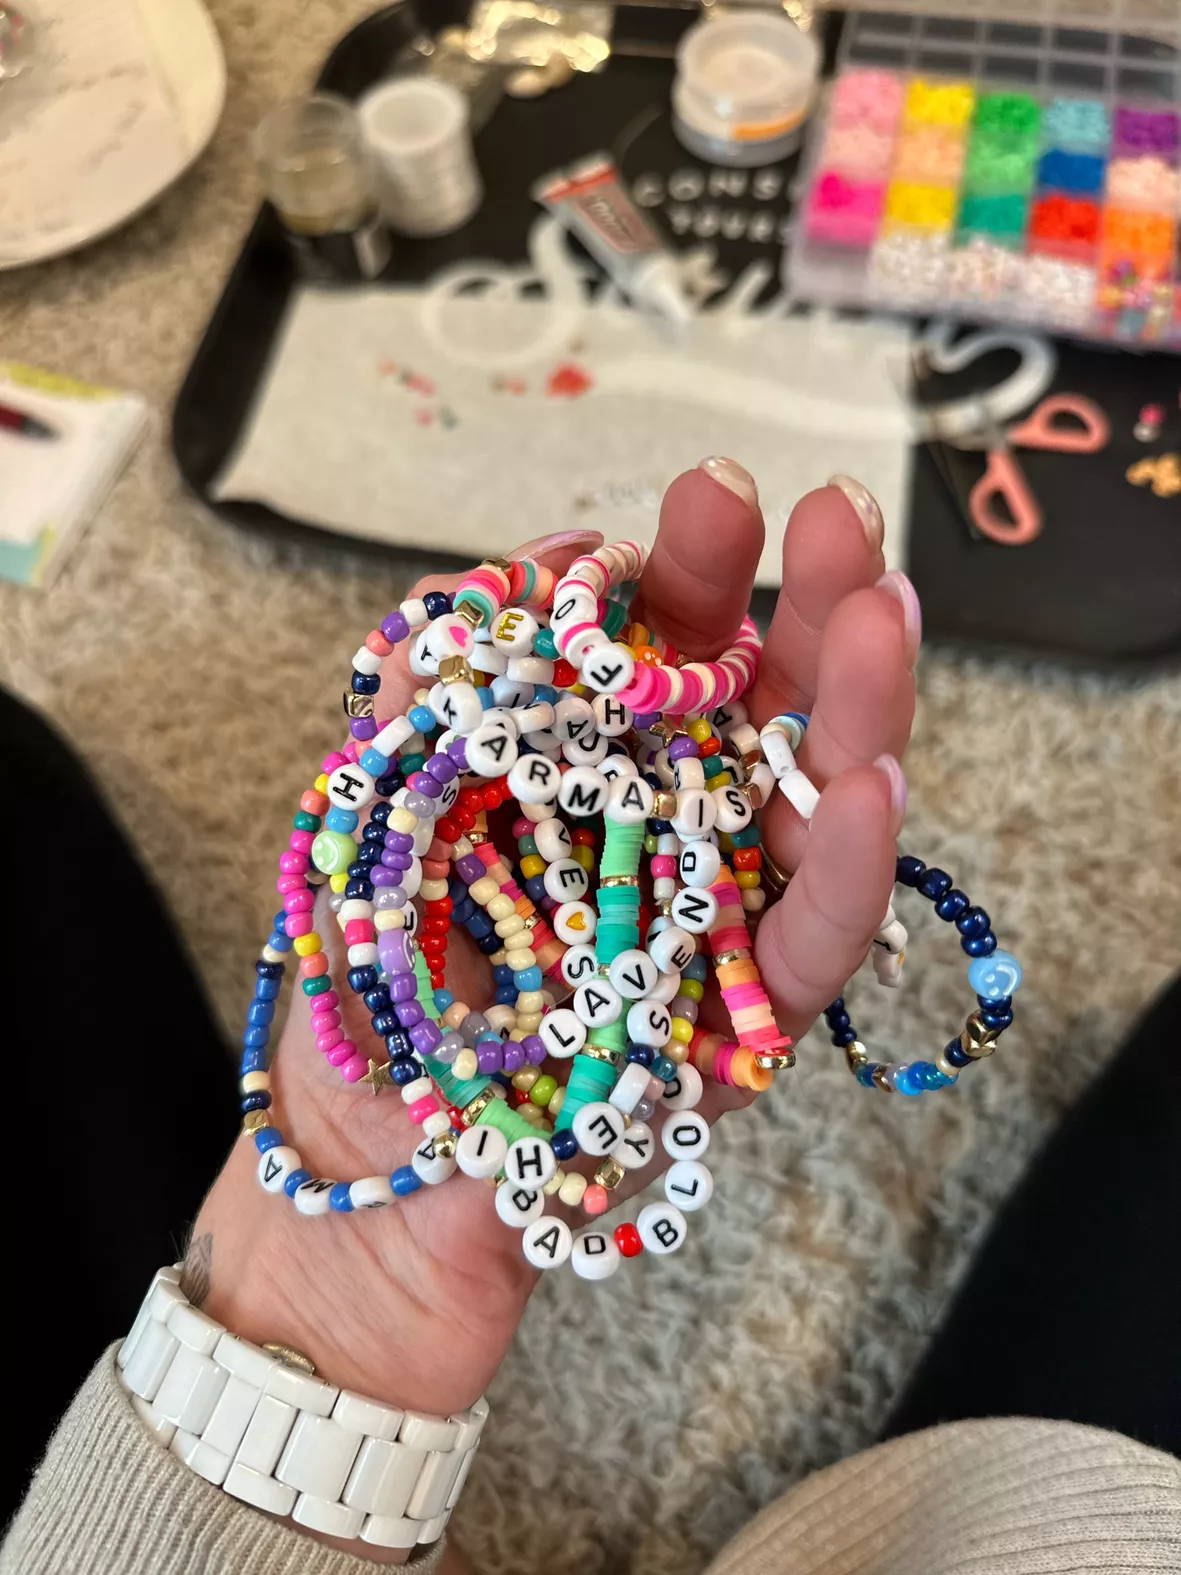 Linked in bio & This friendship bracelet kit has all the letters